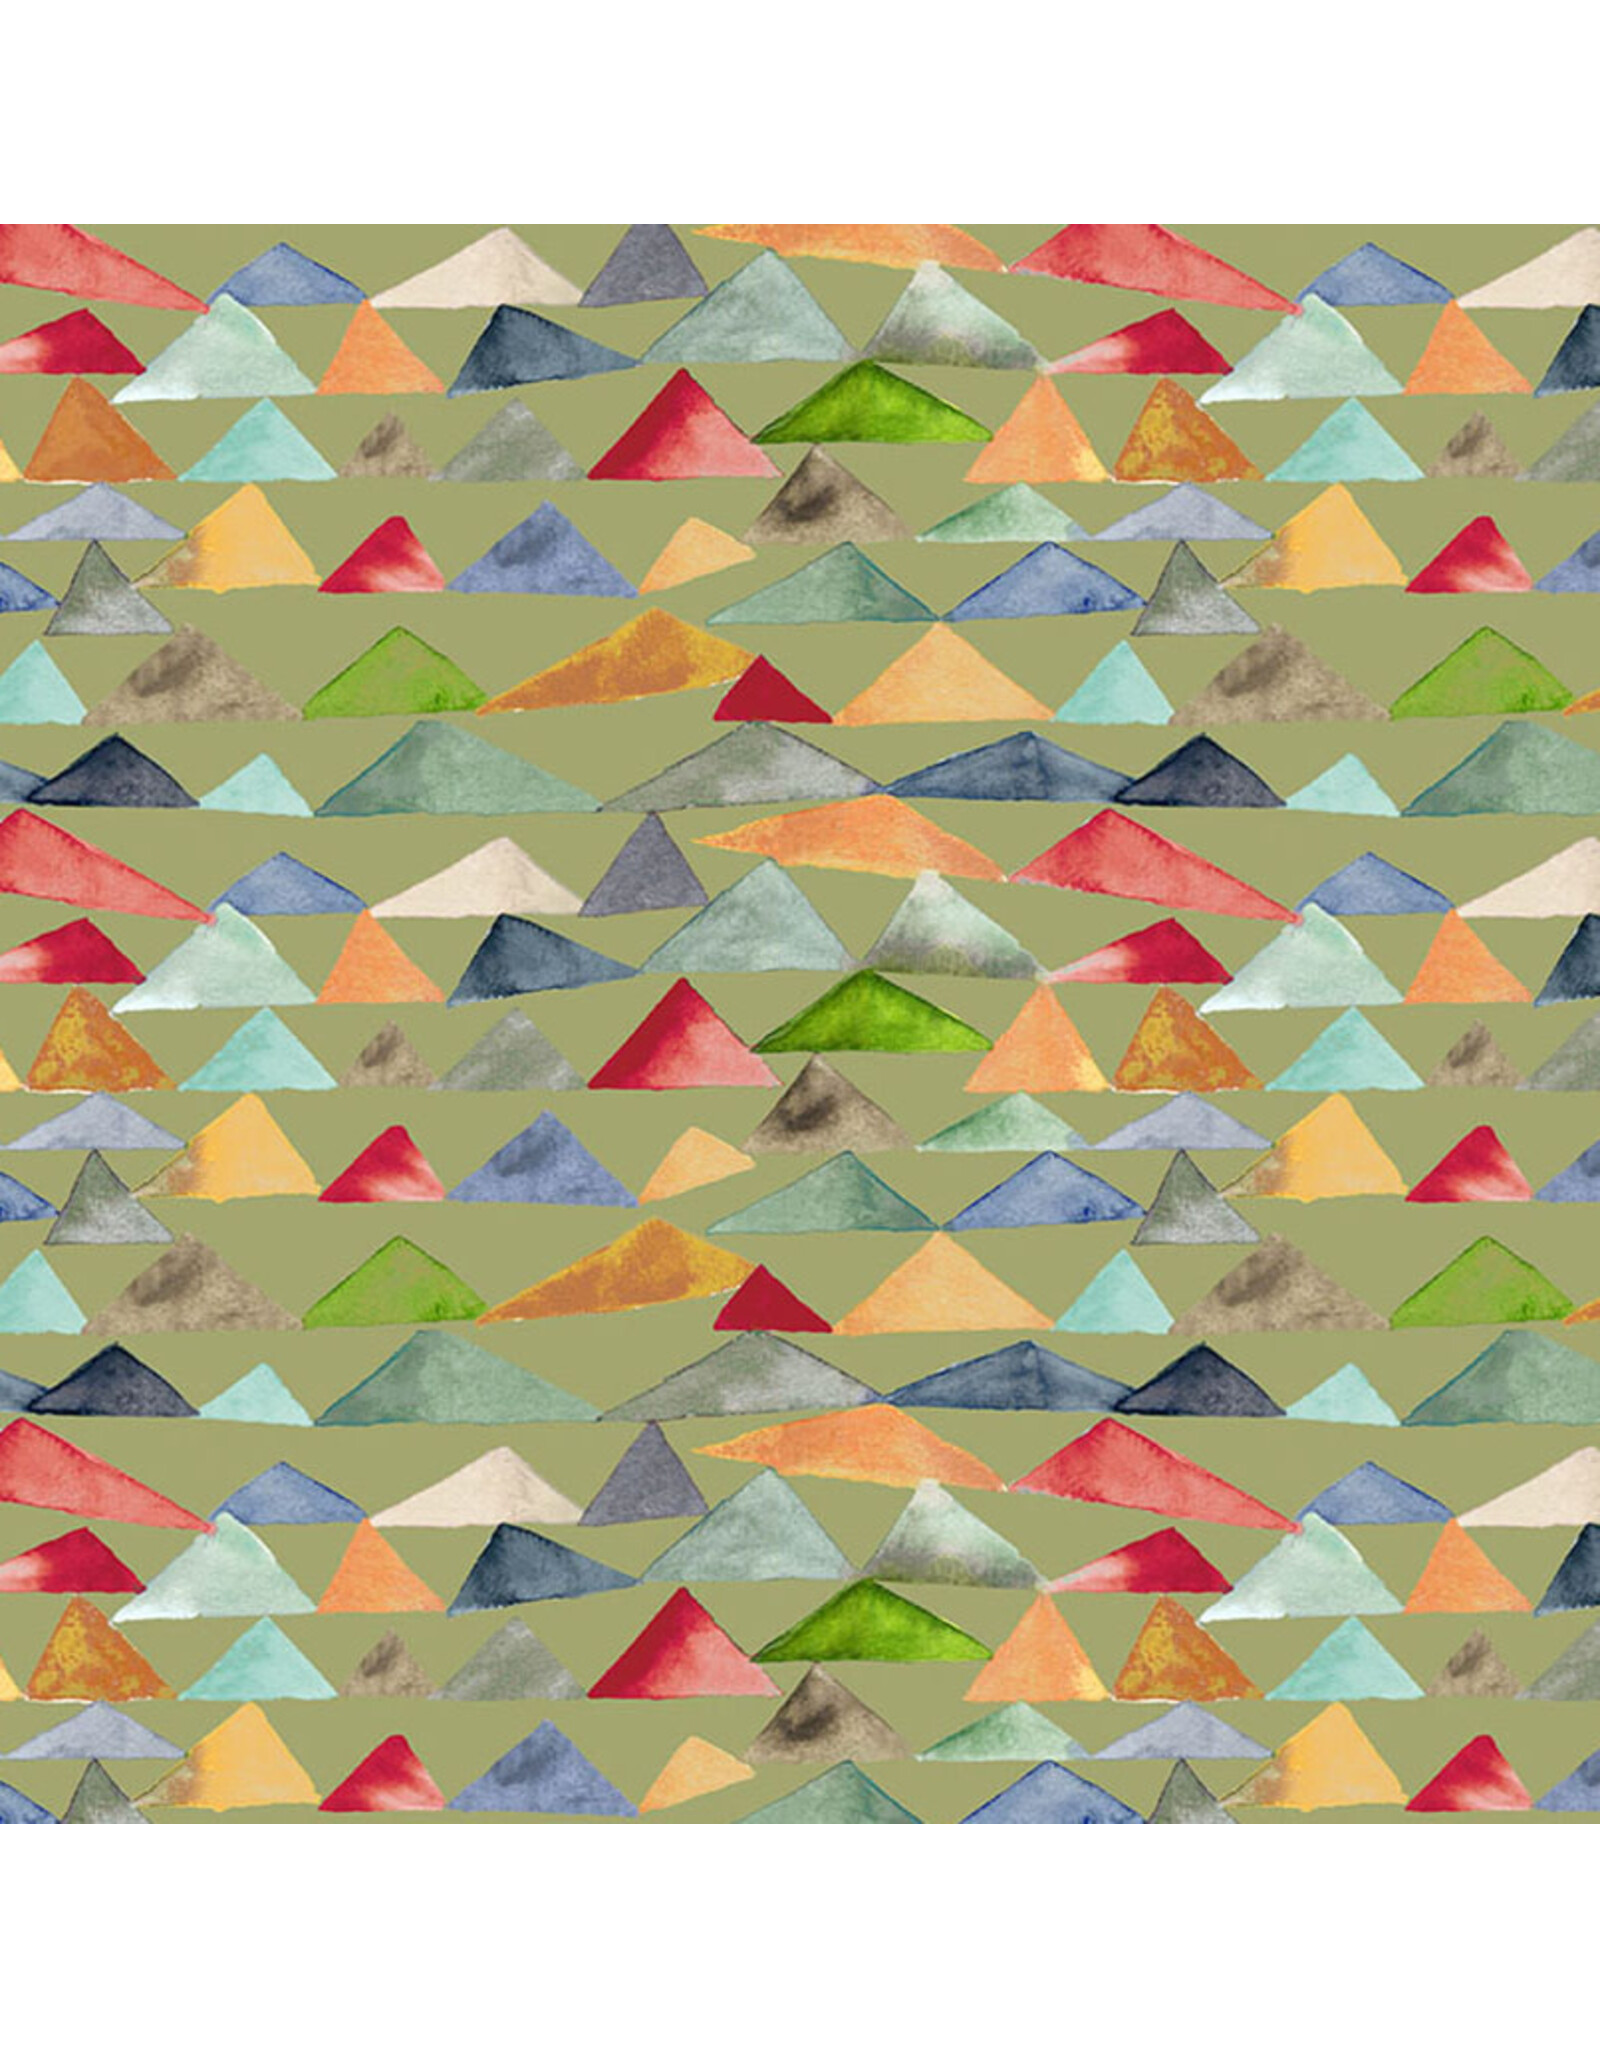 Windham Fabrics Connections, Triangle Rows in Green, Fabric Half-Yards